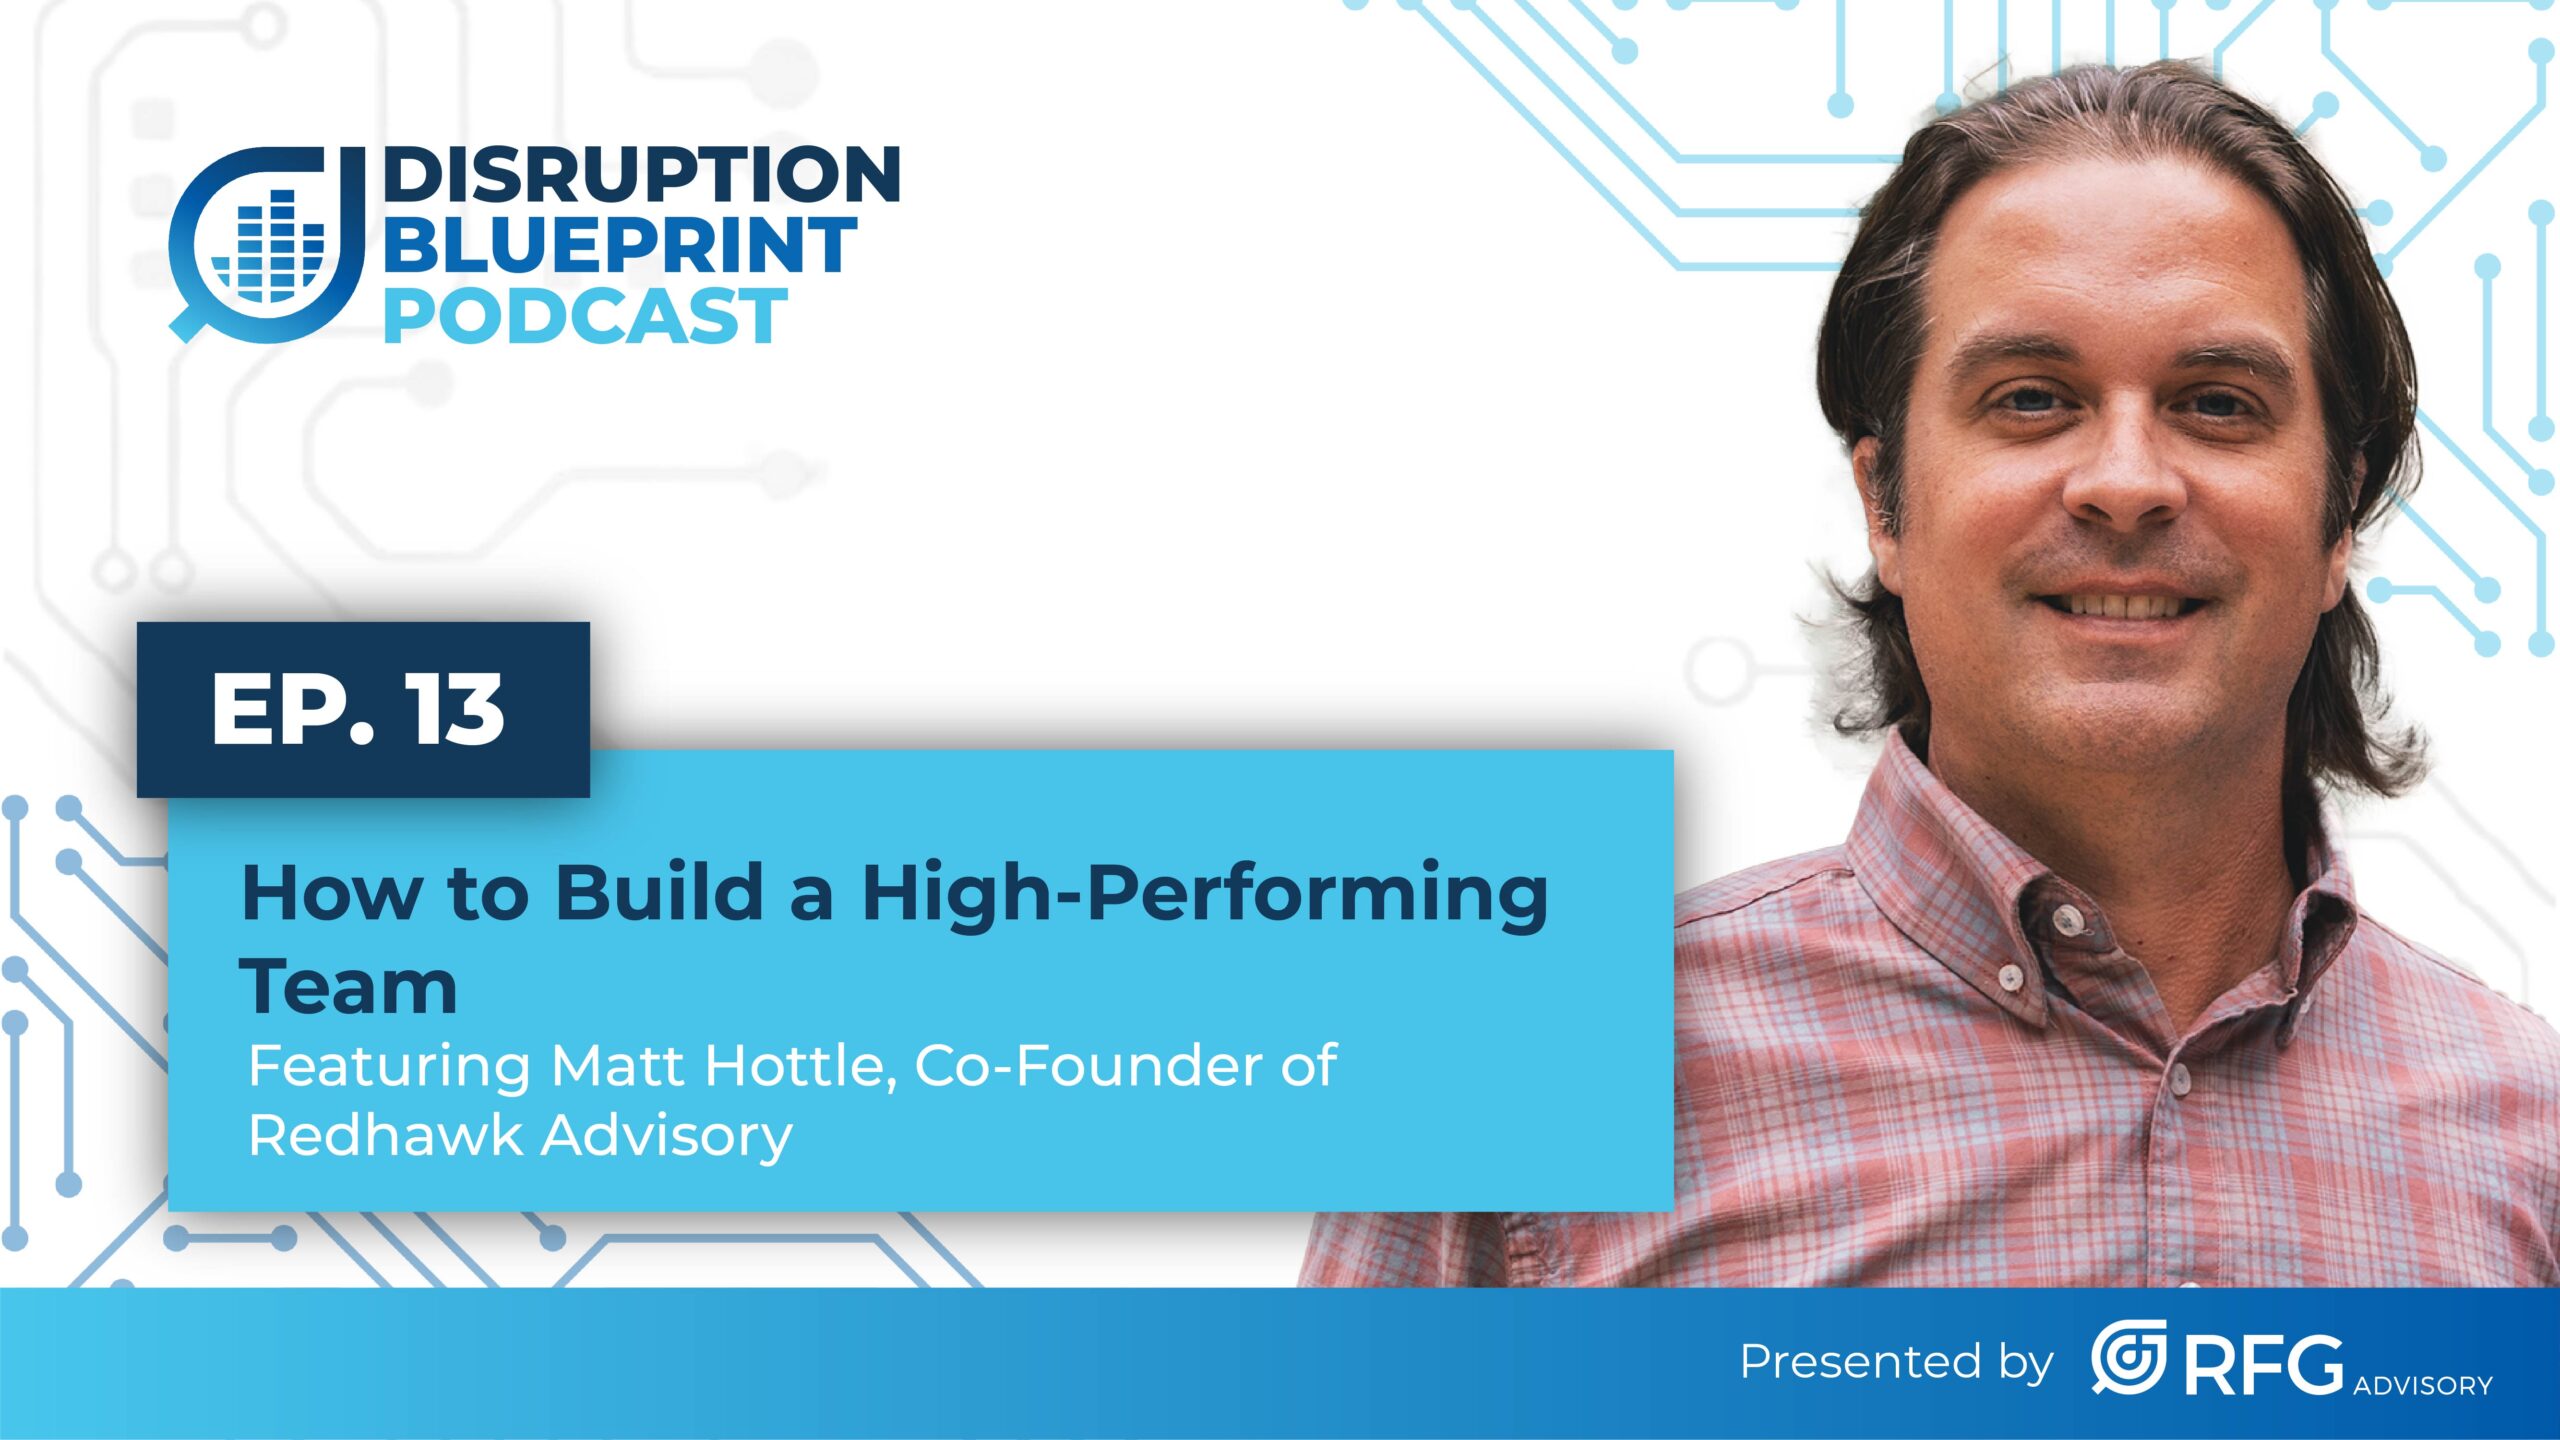 Ep. 13 How to Build a High-Performing Team ft. Matt Hottle, Co-Founder of Redhawk Advisory